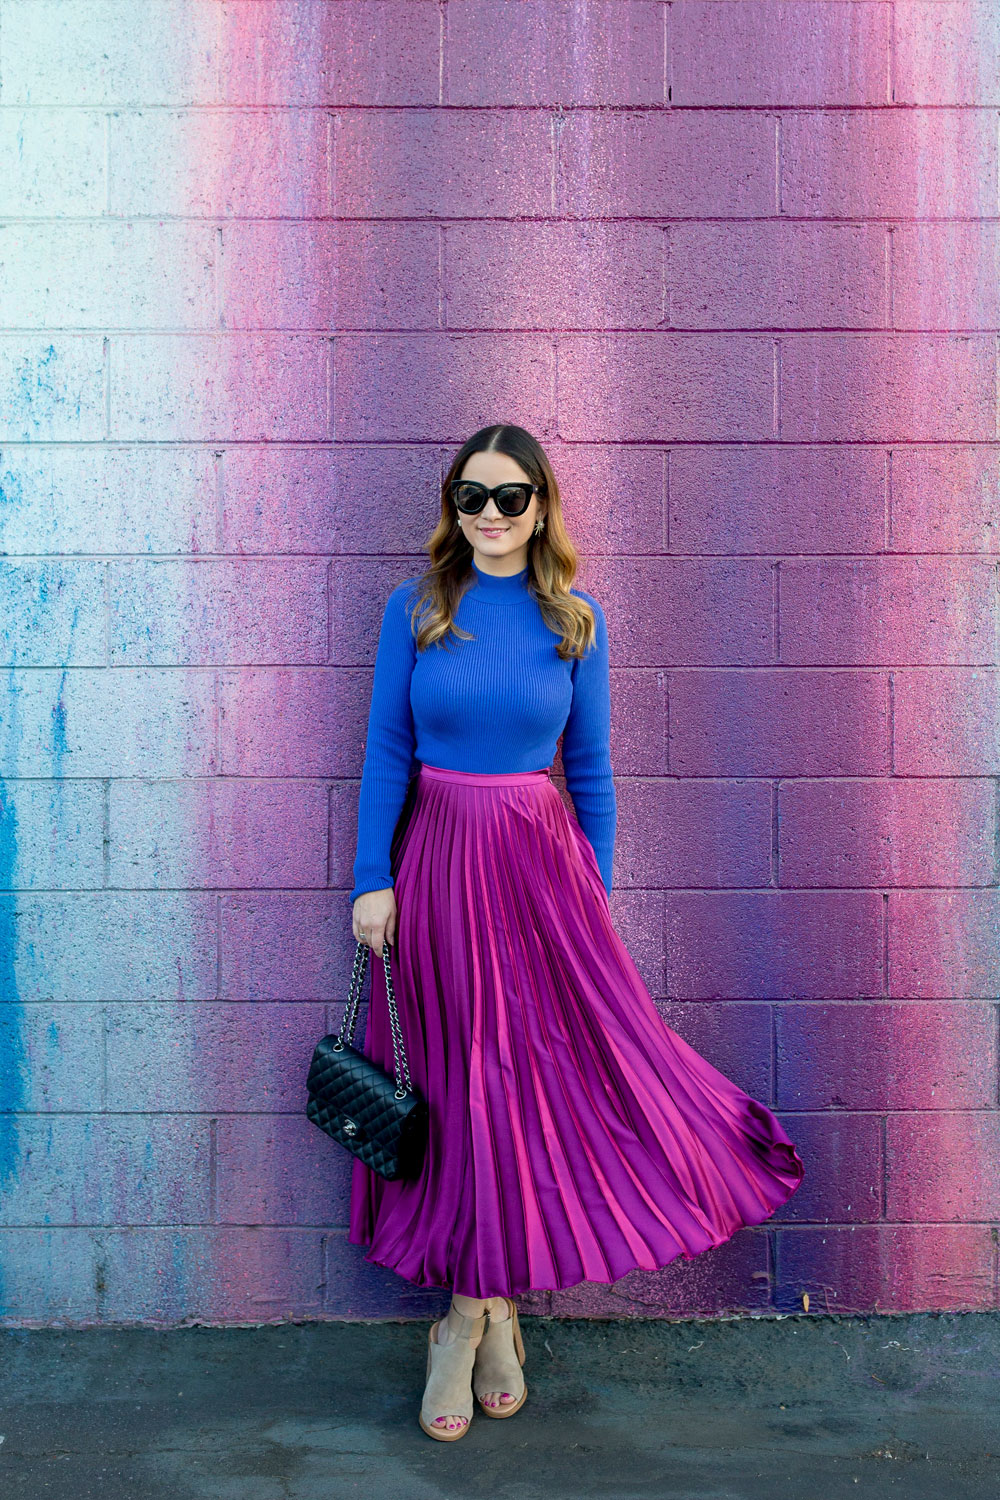 Jennifer Lake Style Charade in an ASOS purple pleated midi skirt, cobalt blue sweater bodysuit and Chanel quilted flap bag at a dripping paint wall in Los Angeles